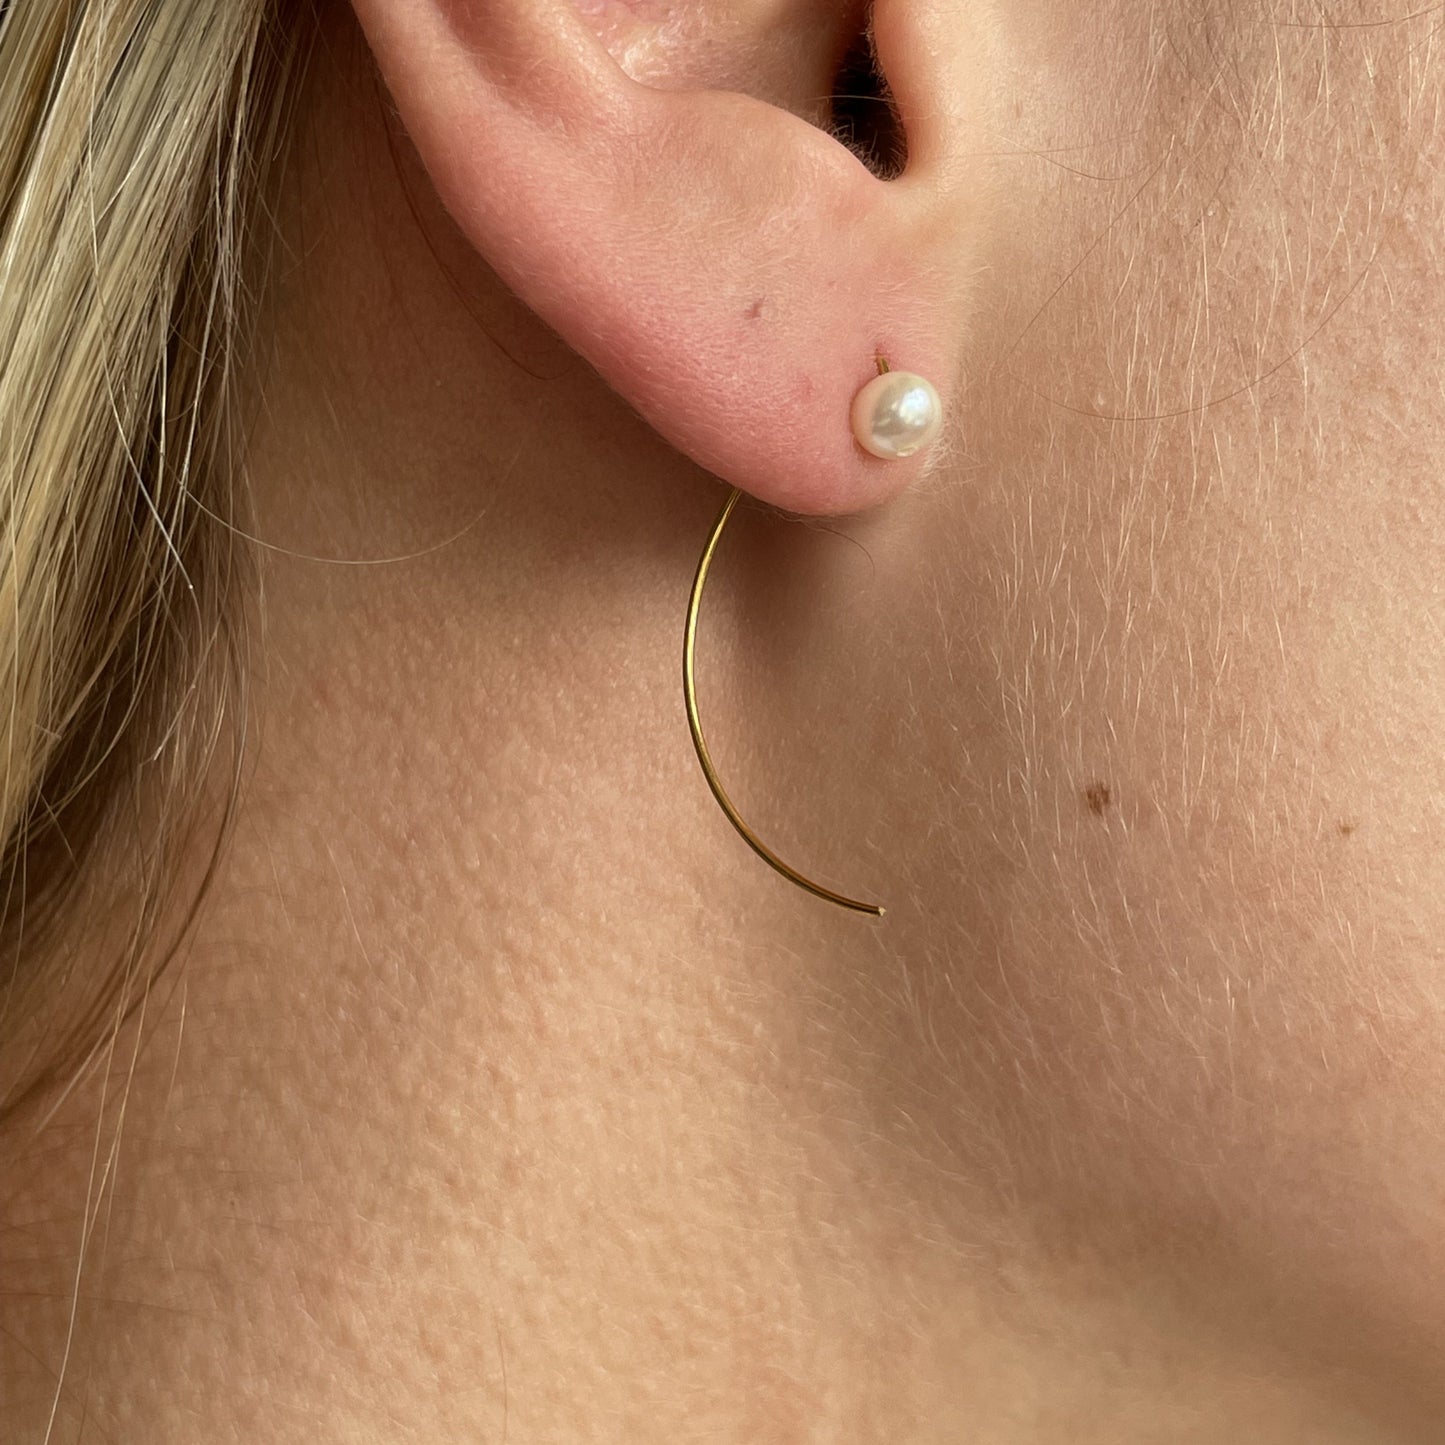 Curve Earrings with Round Freshwater Pearls (7mm)